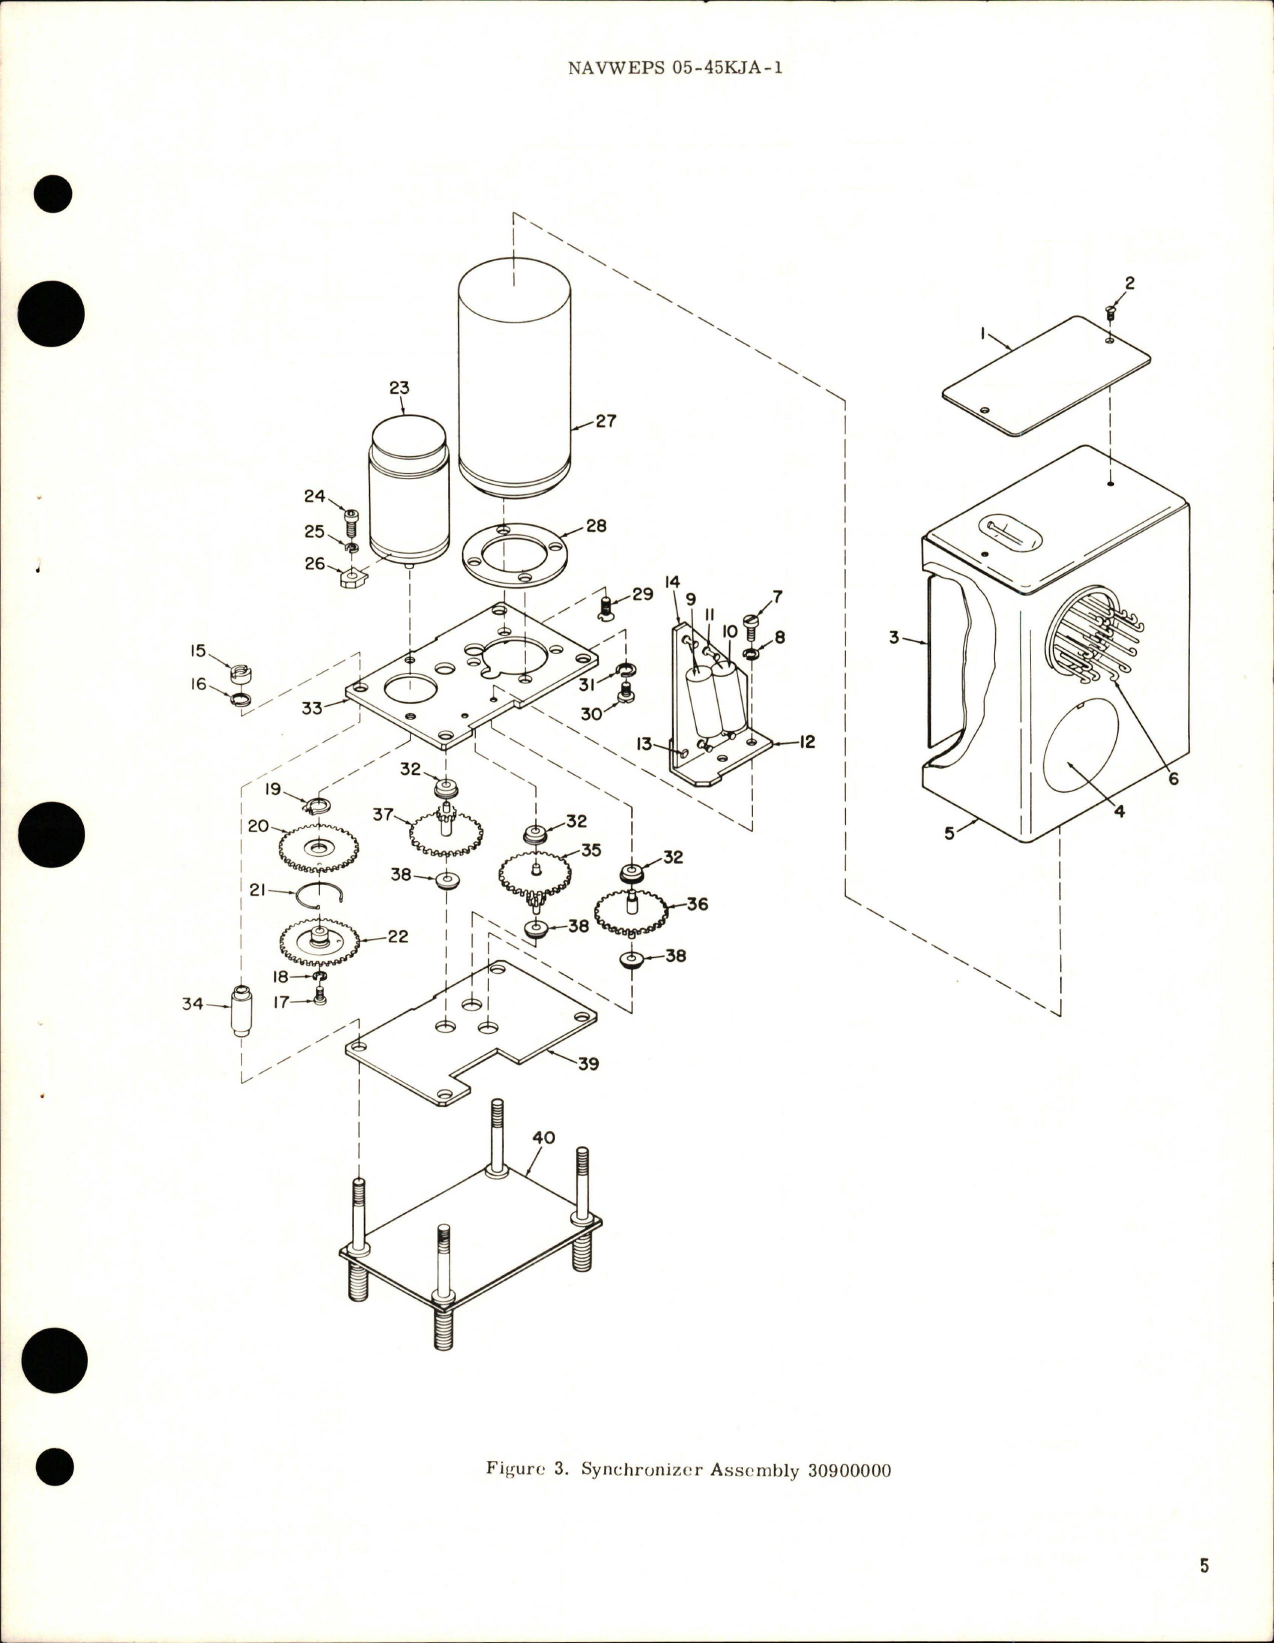 Sample page 5 from AirCorps Library document: Overhaul Instructions with Parts Breakdown for Synchronizer Assy - 30900000 